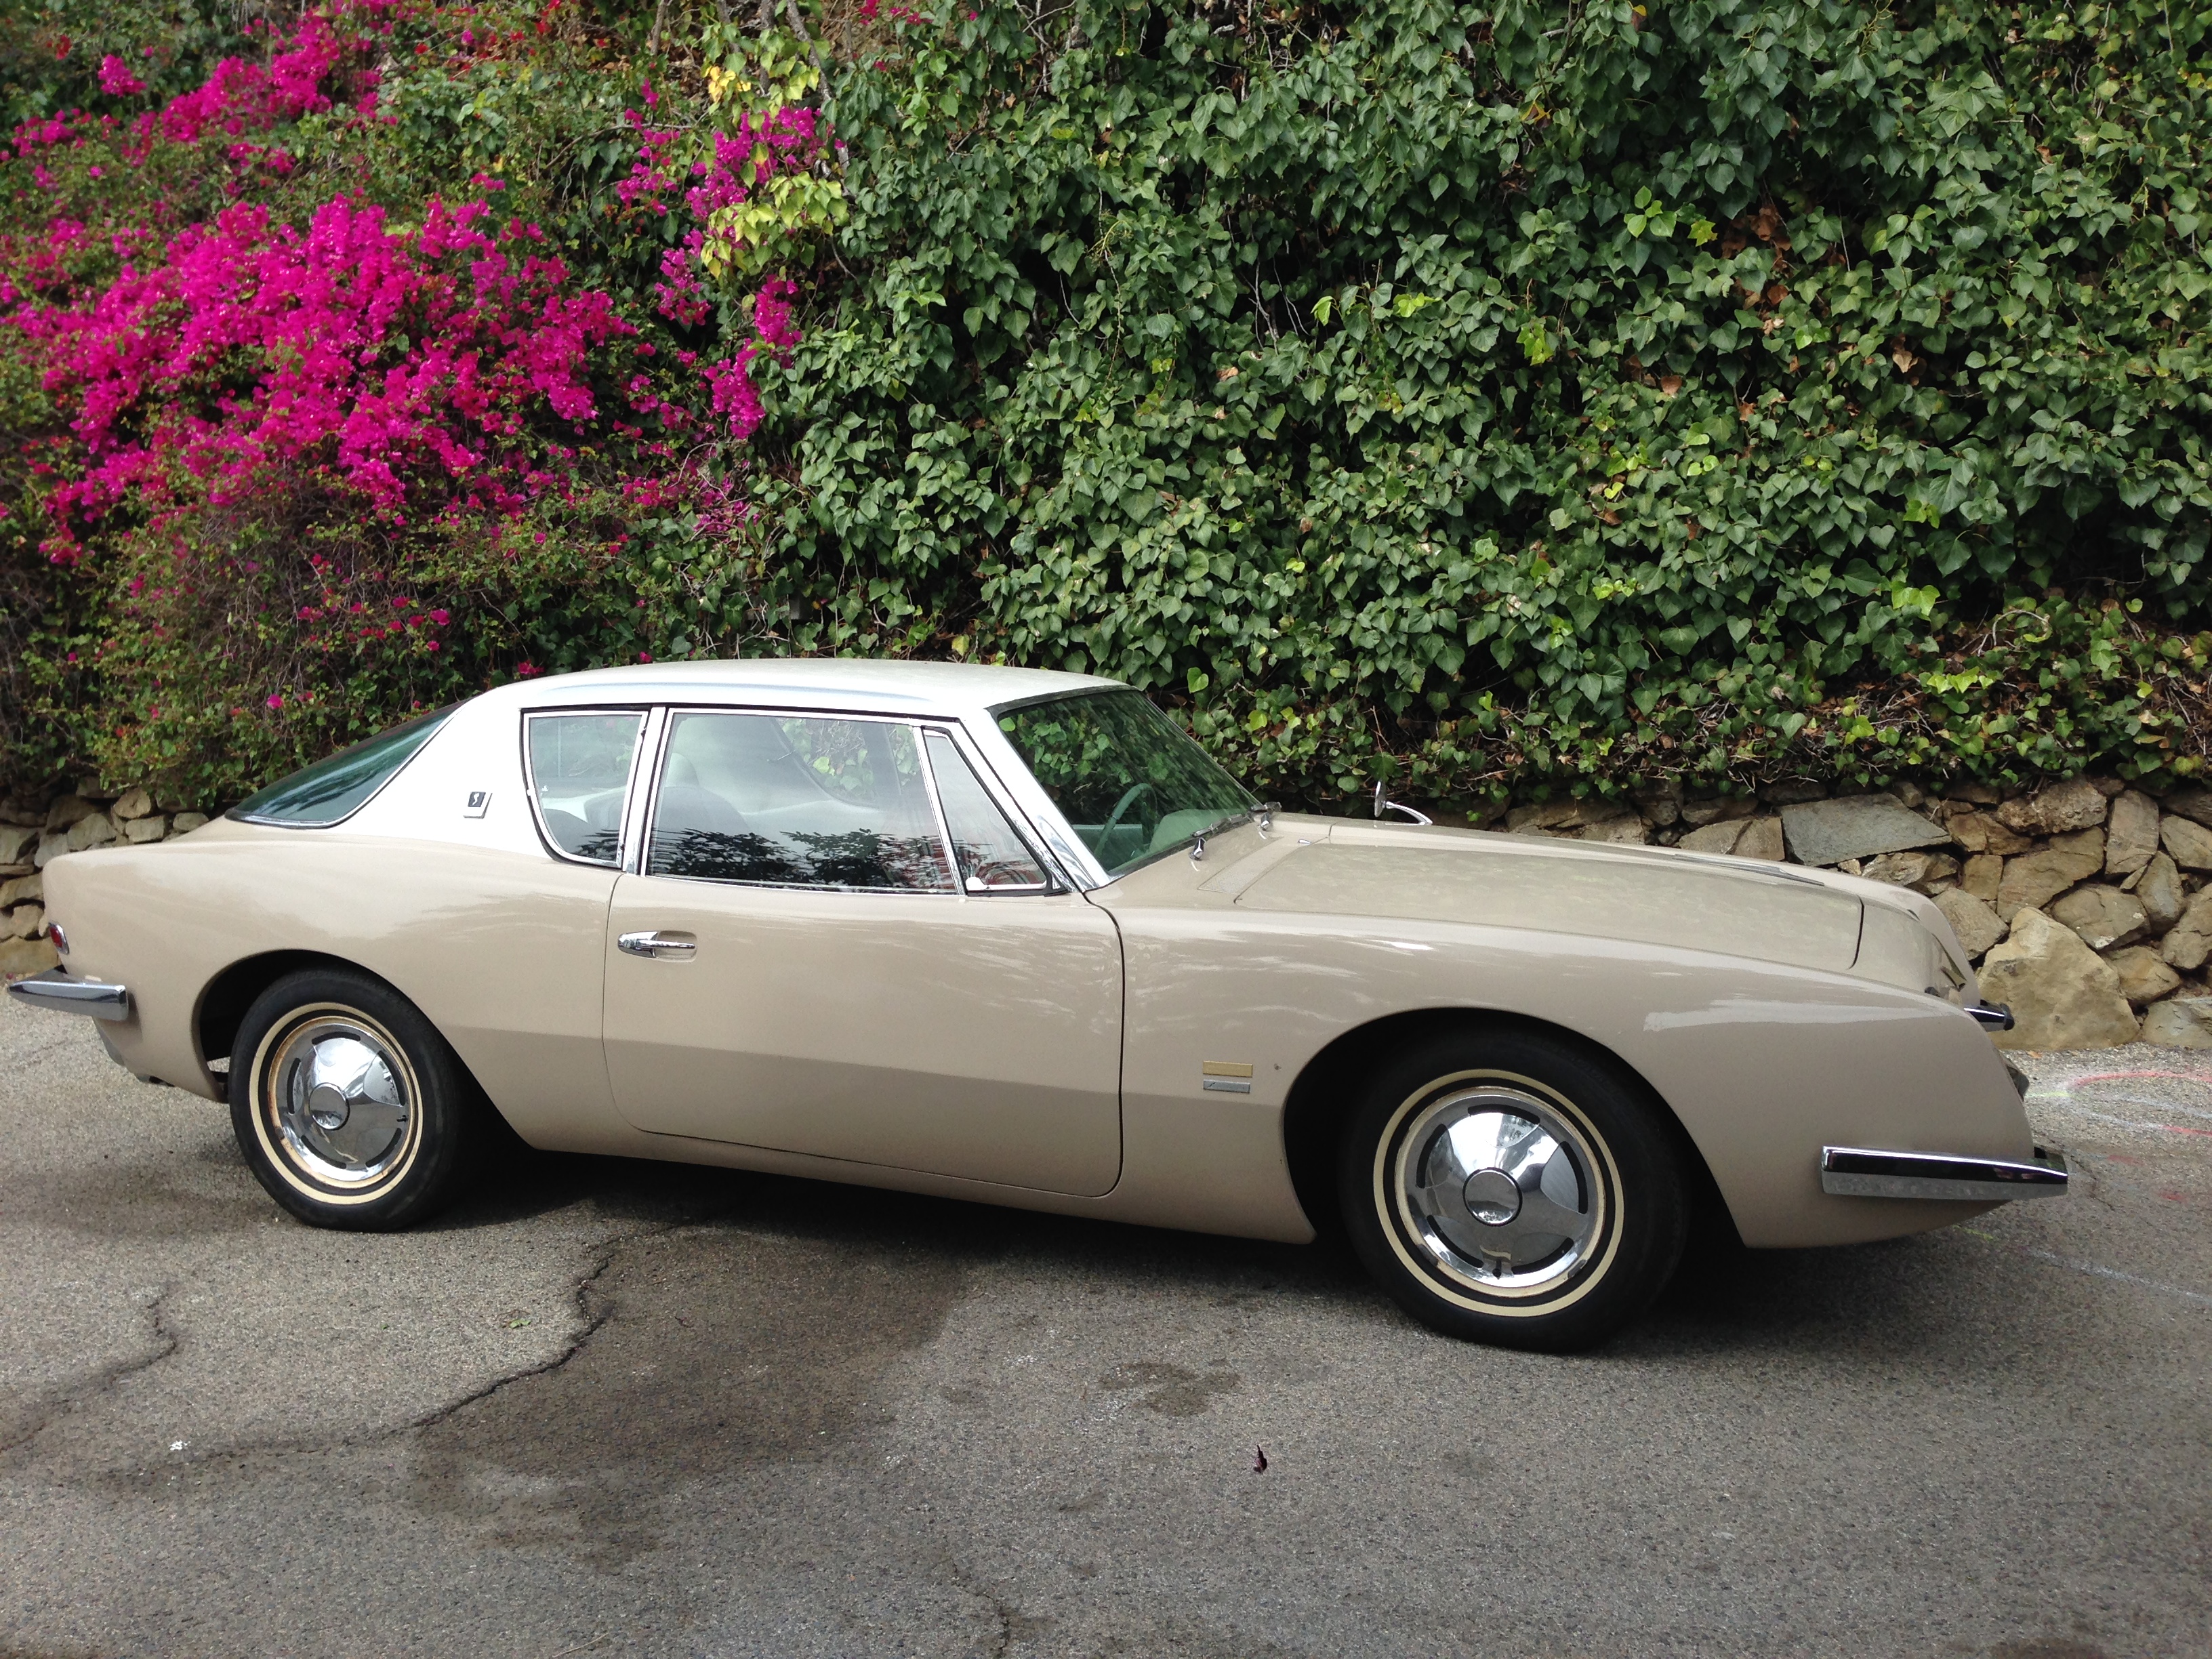 Raymond Loewy, Avanti, 1961, manufactured by Studebaker Corporation in 1963, gift of the 2014 Decorative Arts and Design Acquisition Committee (DA2)